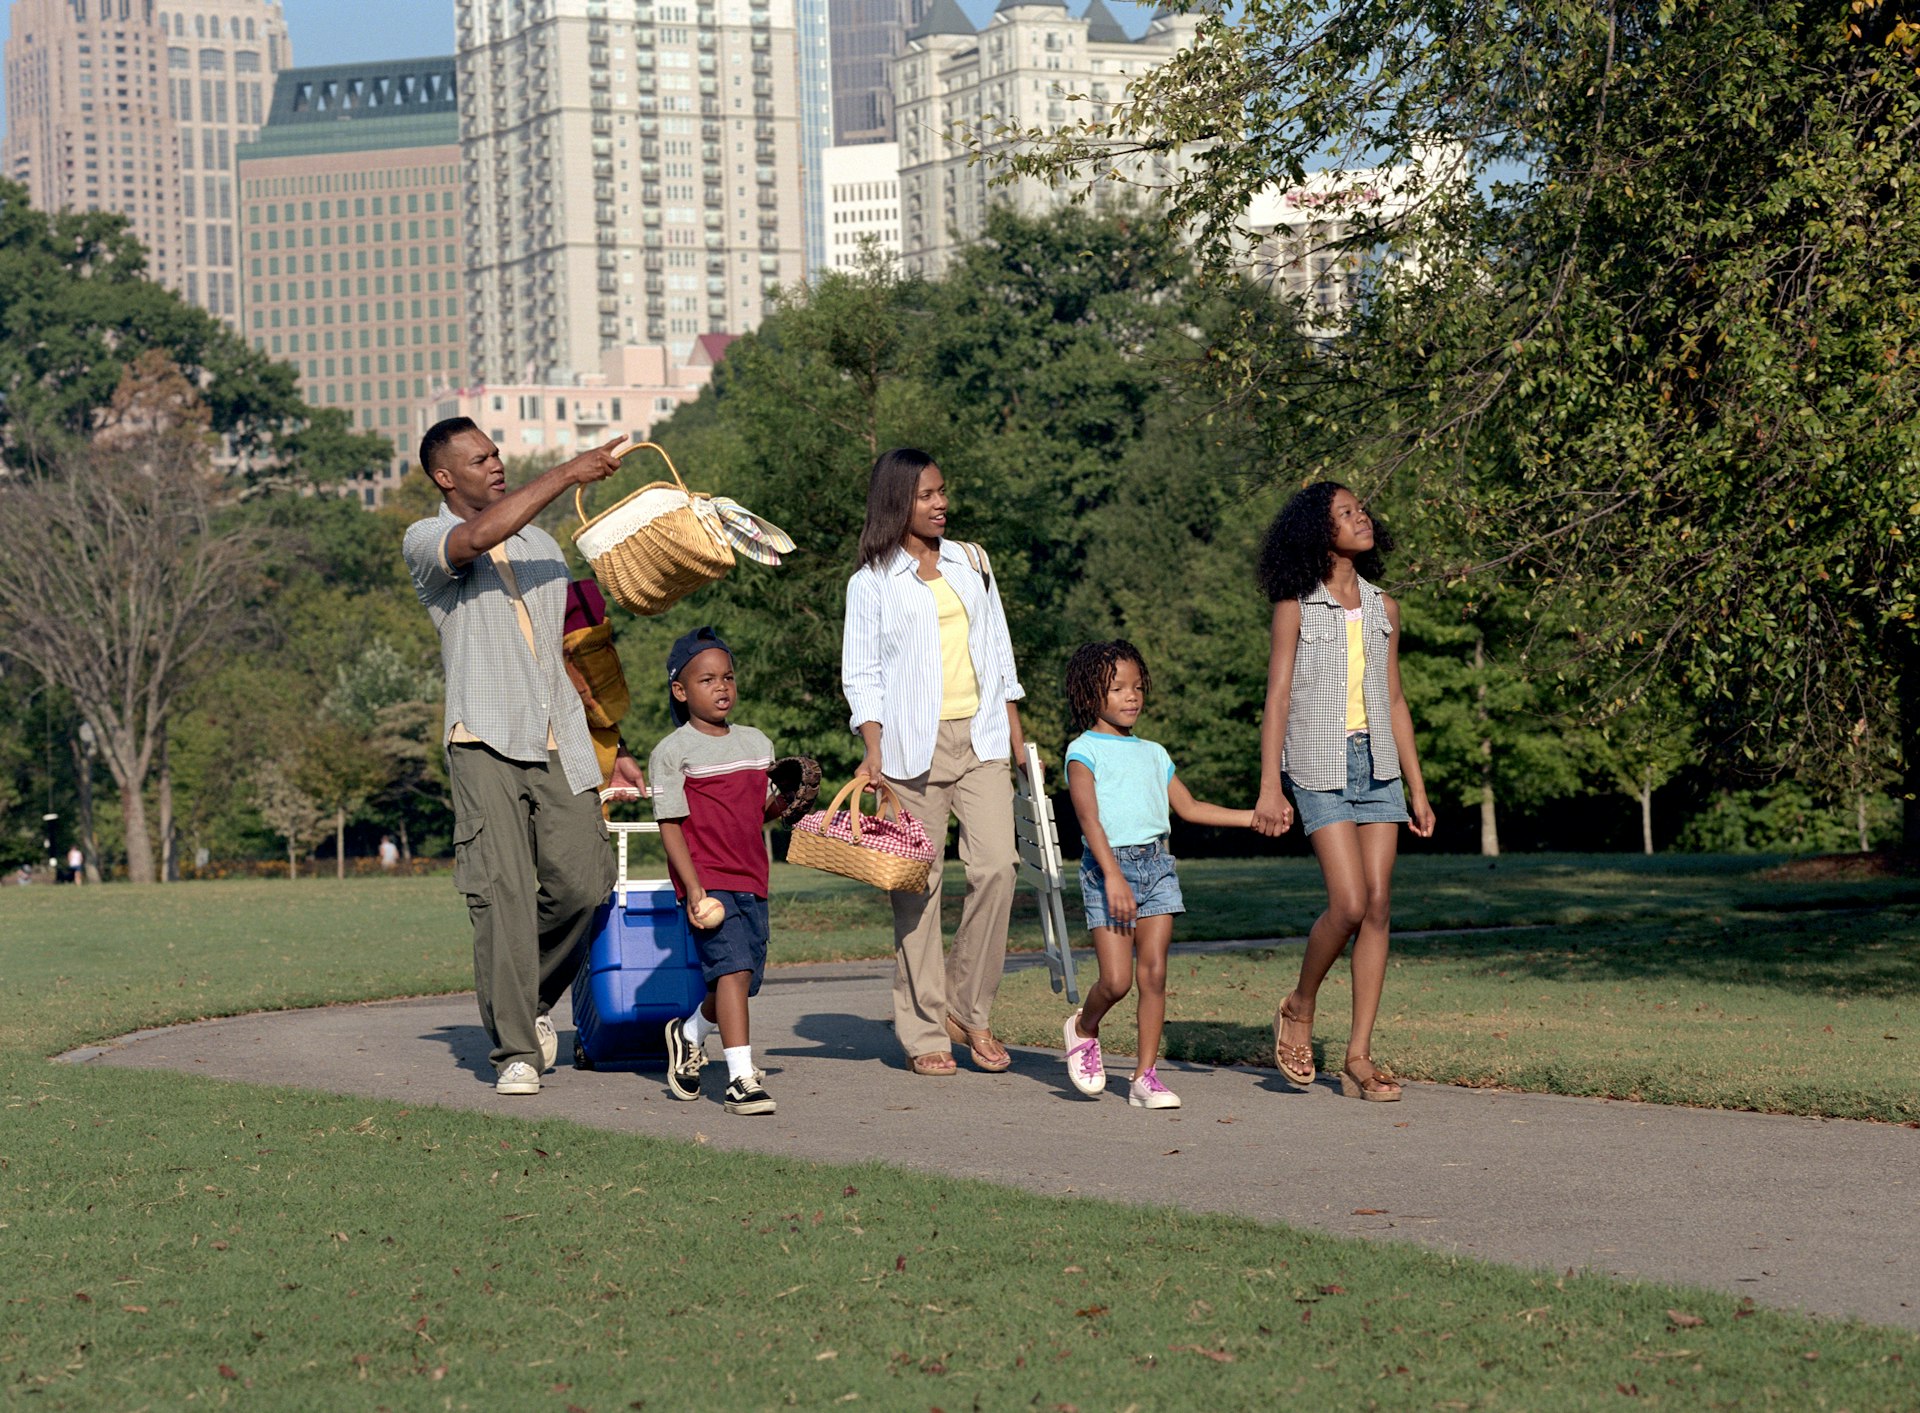 A family of five walking along a path in Piedmont Park, Atlanta, with picnic baskets and a cooler on wheels.